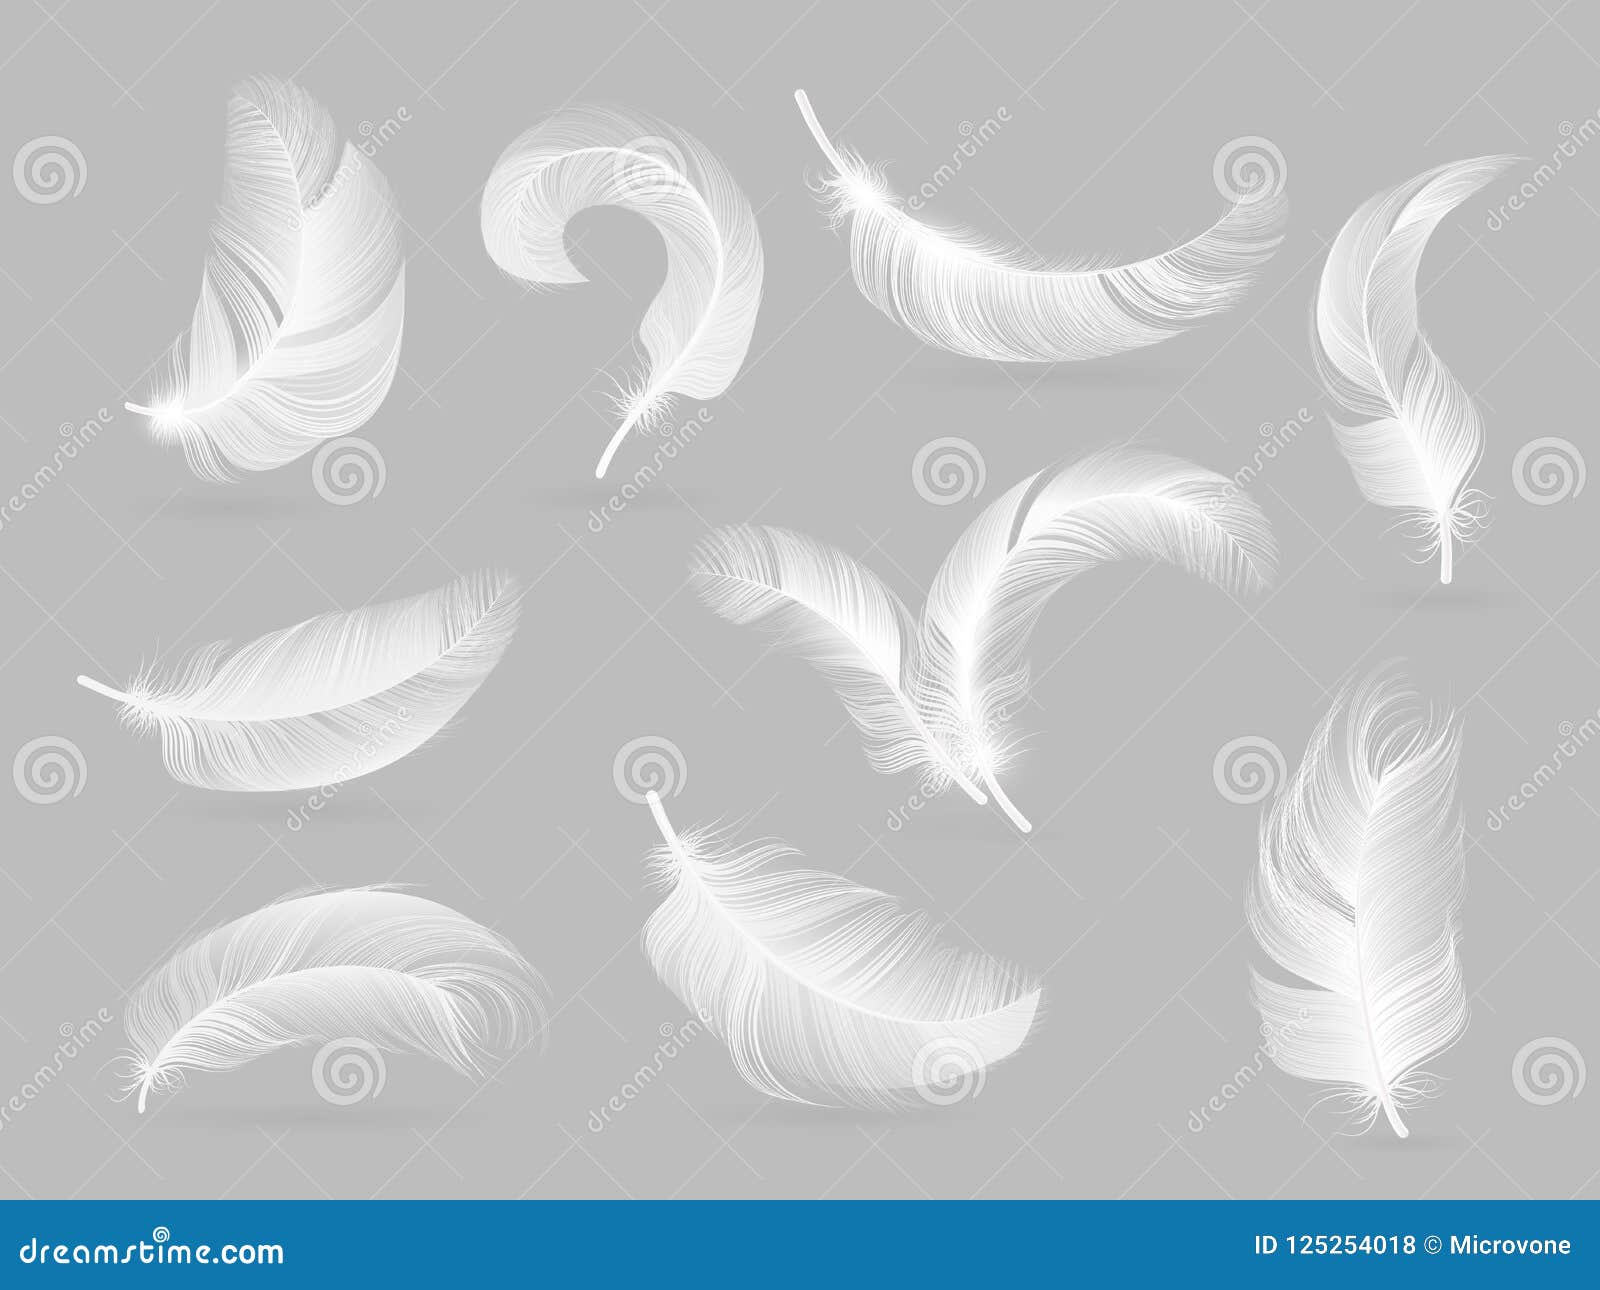 Realistic white soft goose feathers fluffy Vector Image